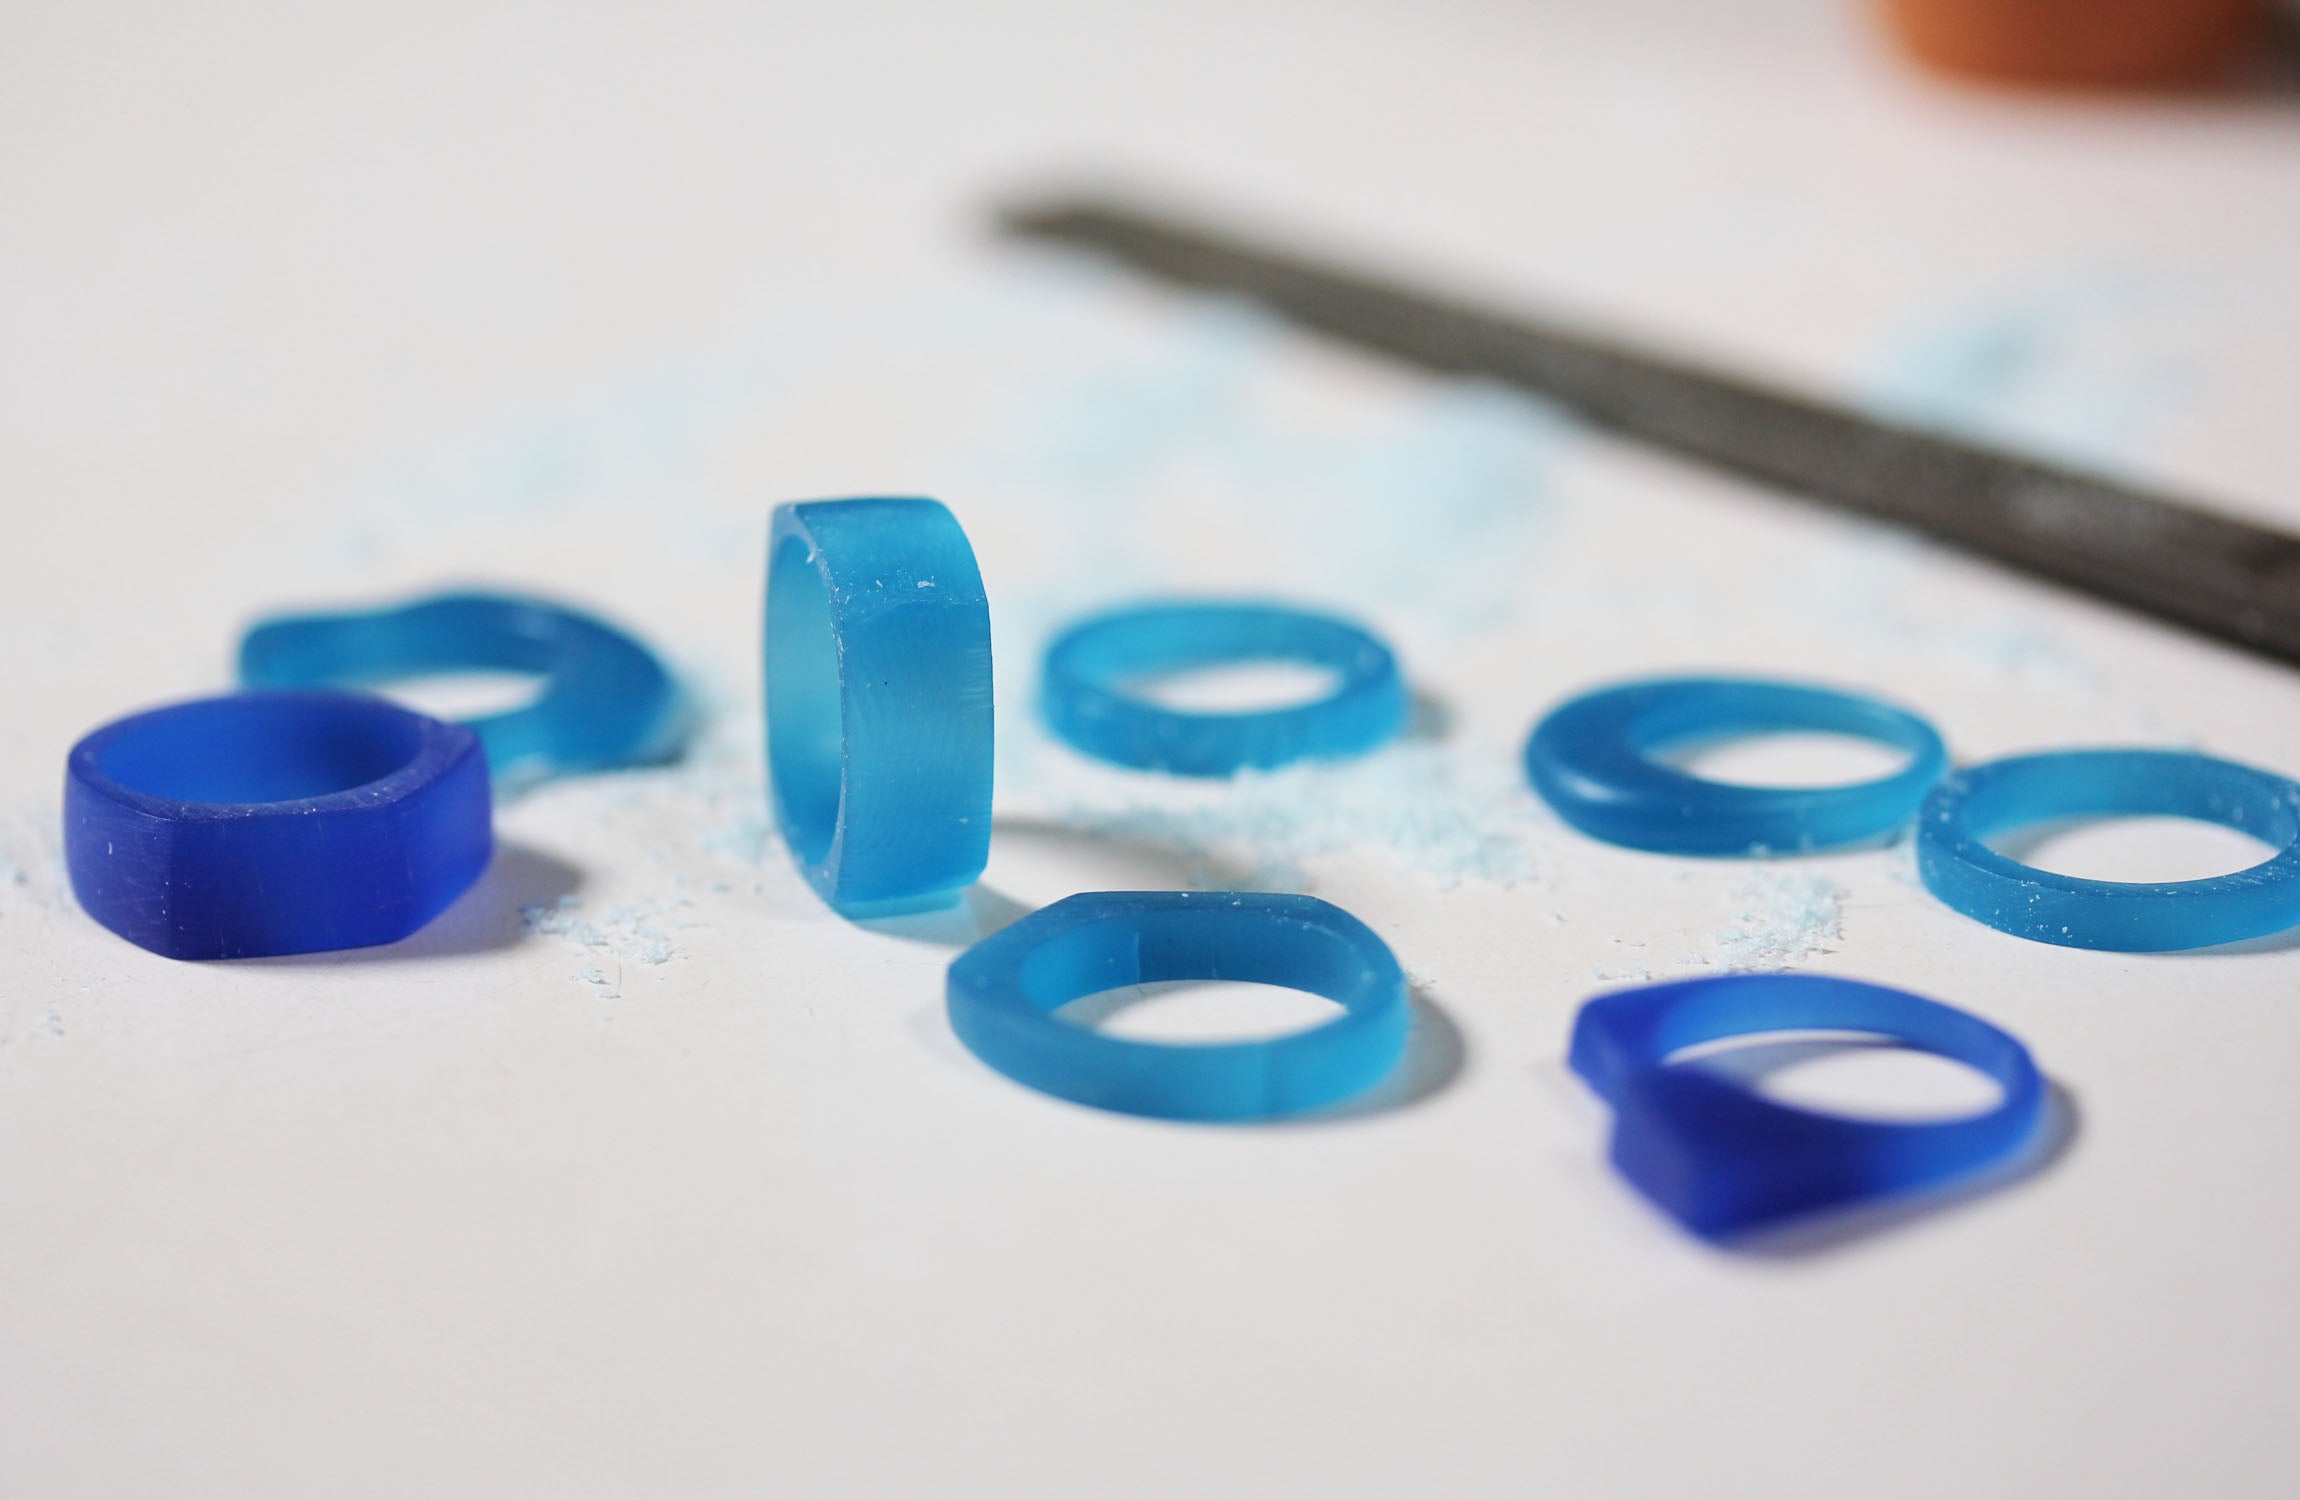 Carve Your Own Ring Kit